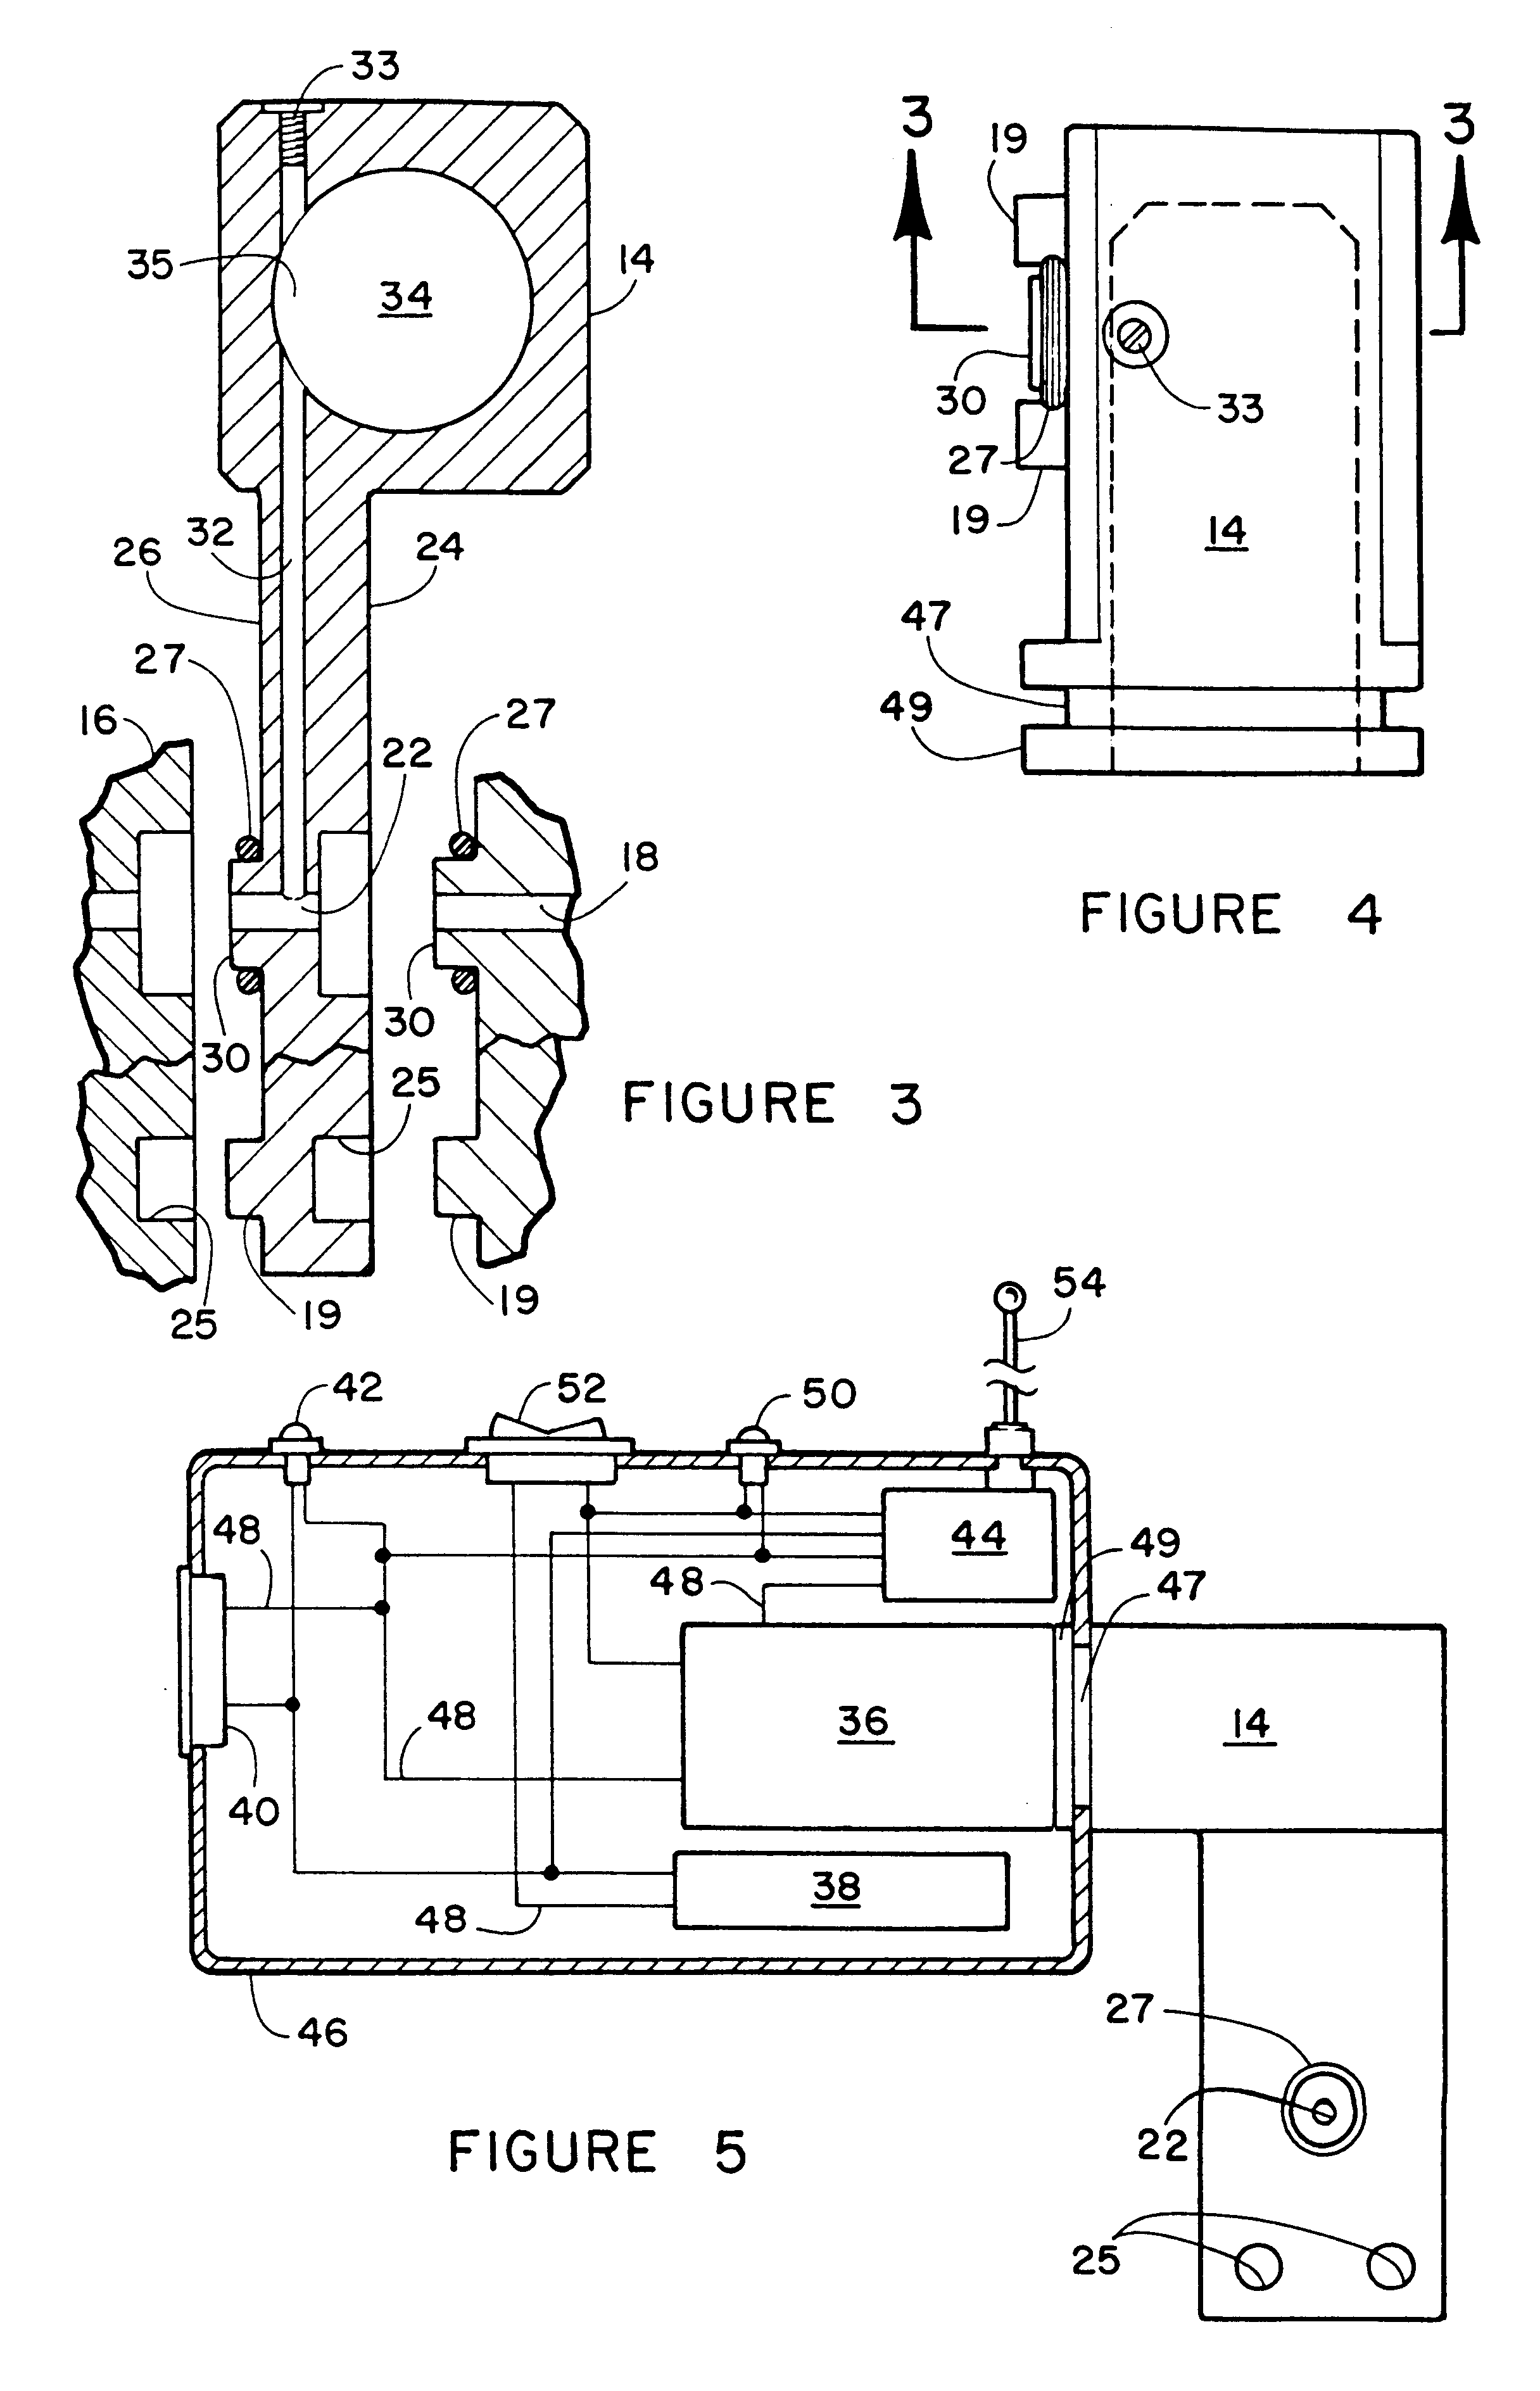 Gauge mounted pressure monitor and alarm for compression mounting with compressed gas storage tank